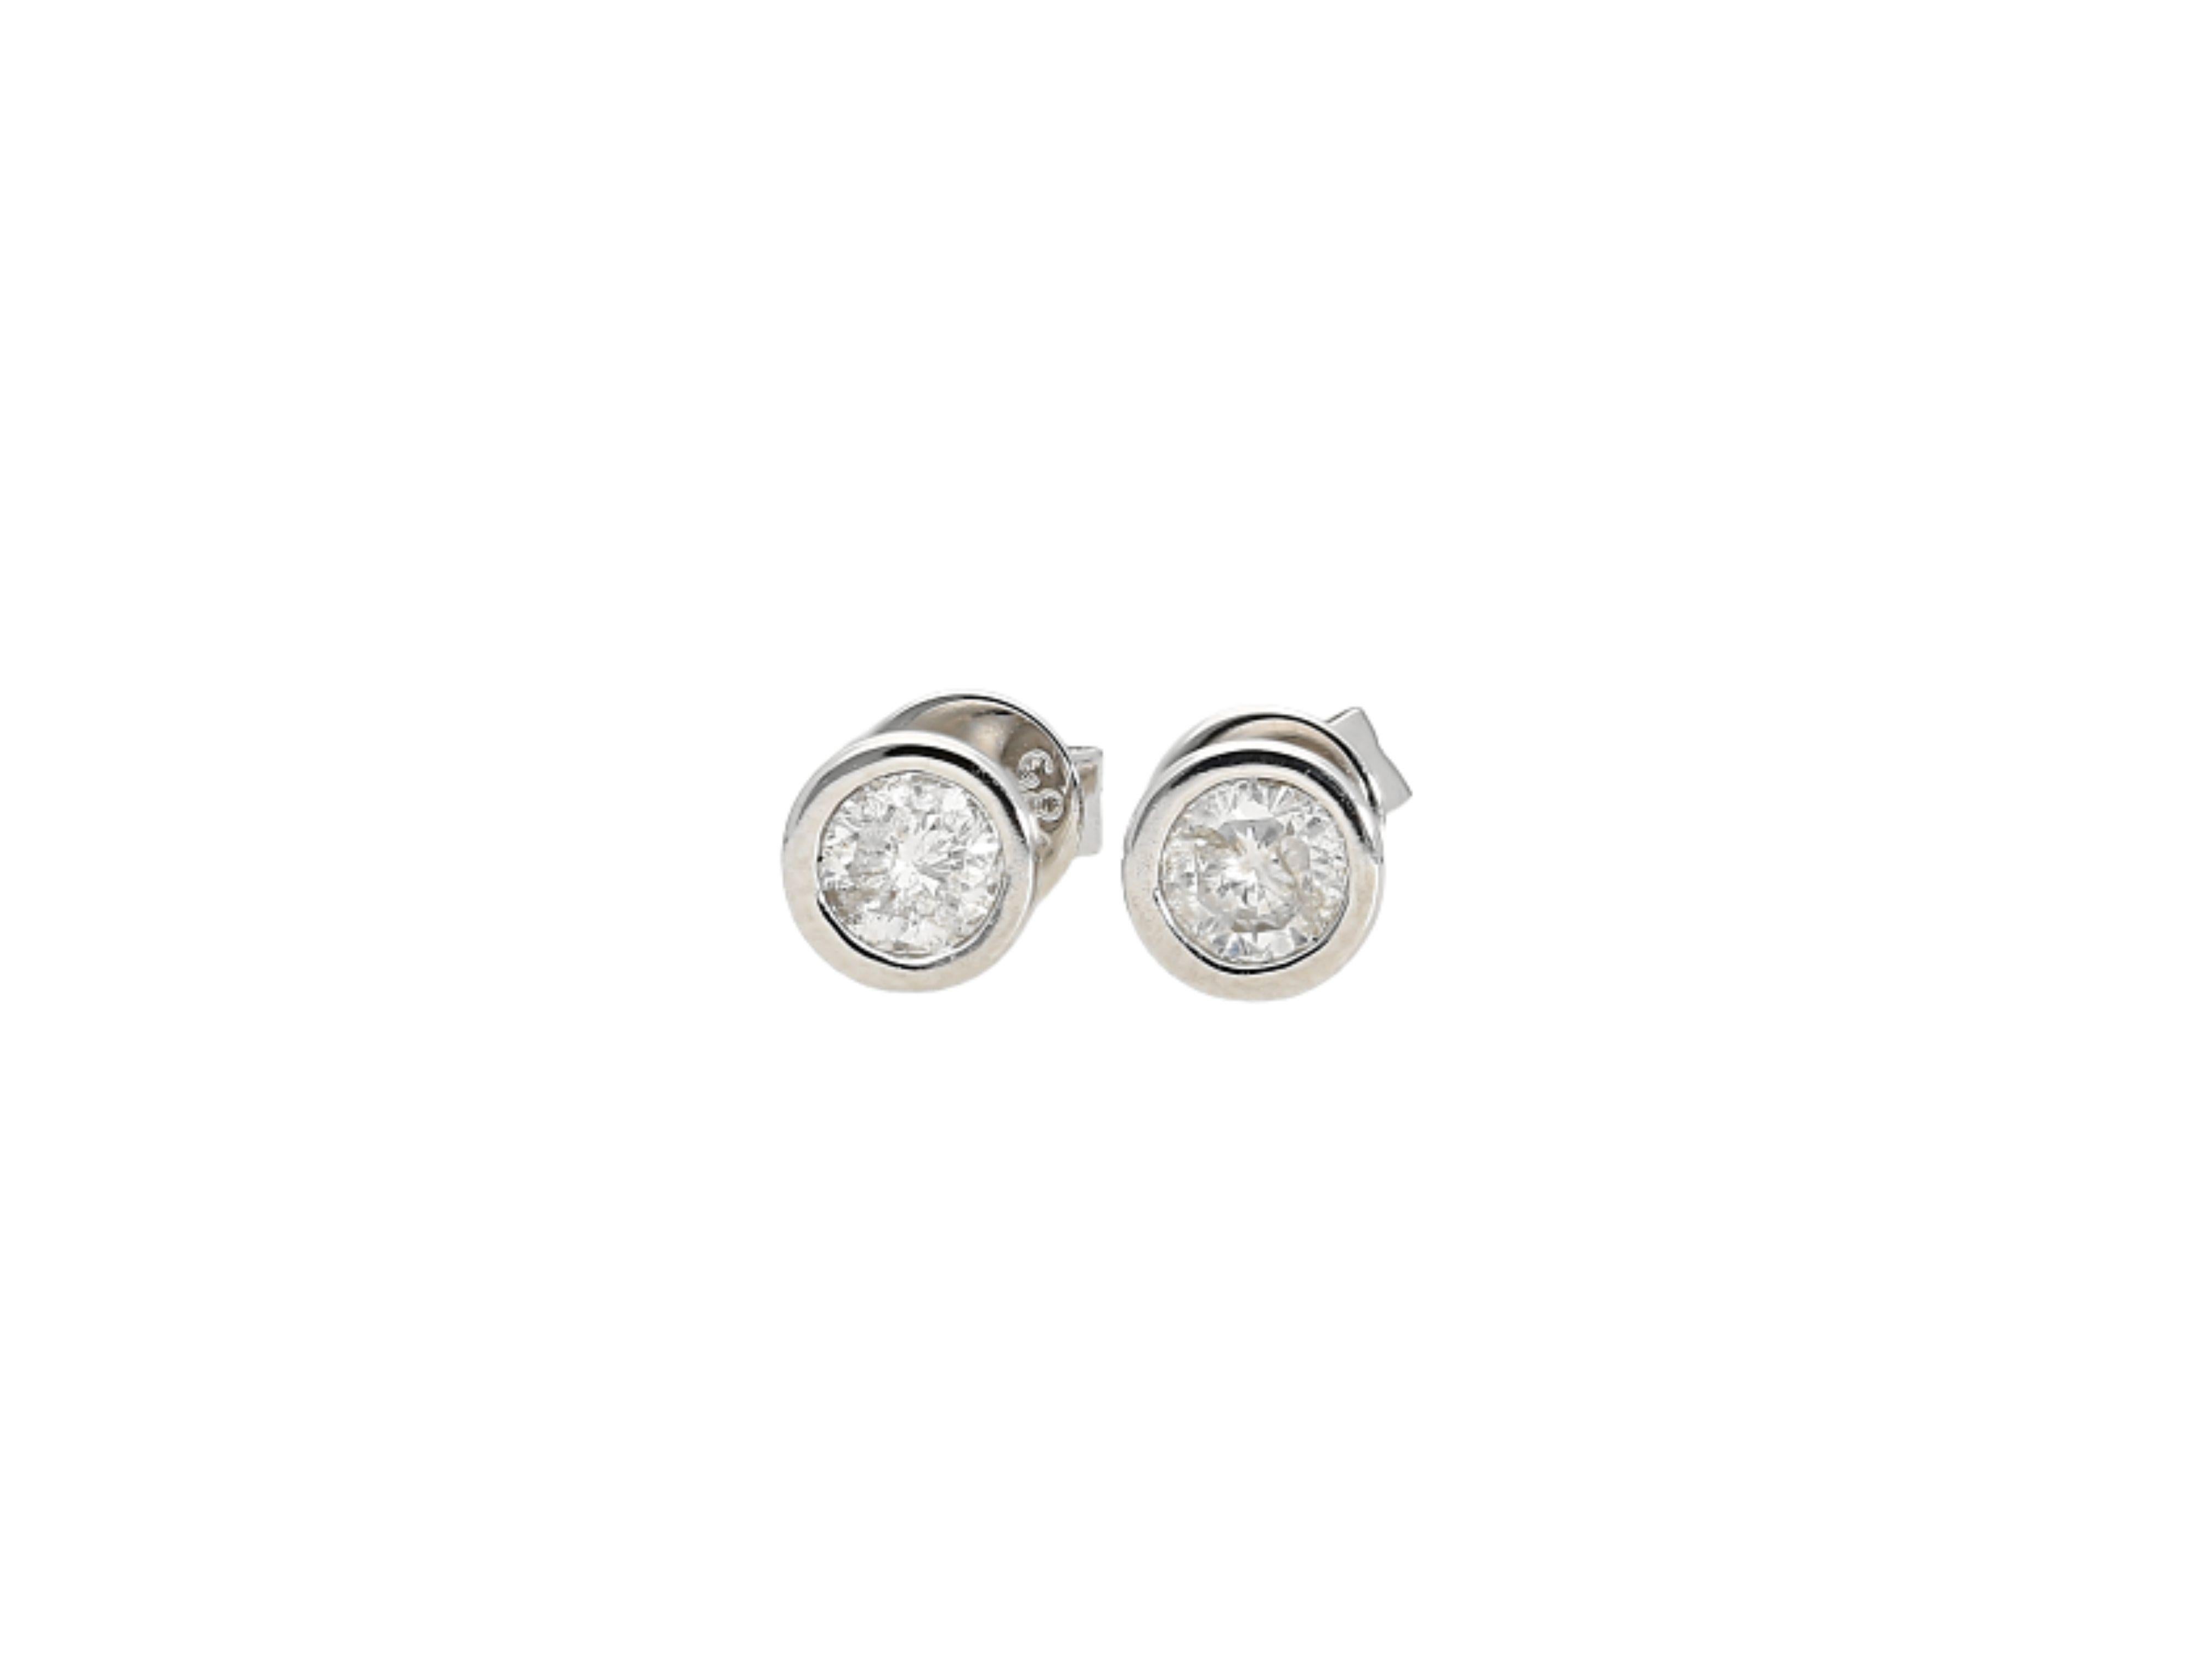 Simple and elegant natural diamond stud earrings bezel set in 14 karat white gold for long-lasting and durable use. These diamonds are 100% natural, mined diamonds. Set in 14k solid white gold. The ideal everyday pair of diamond stud earrings that